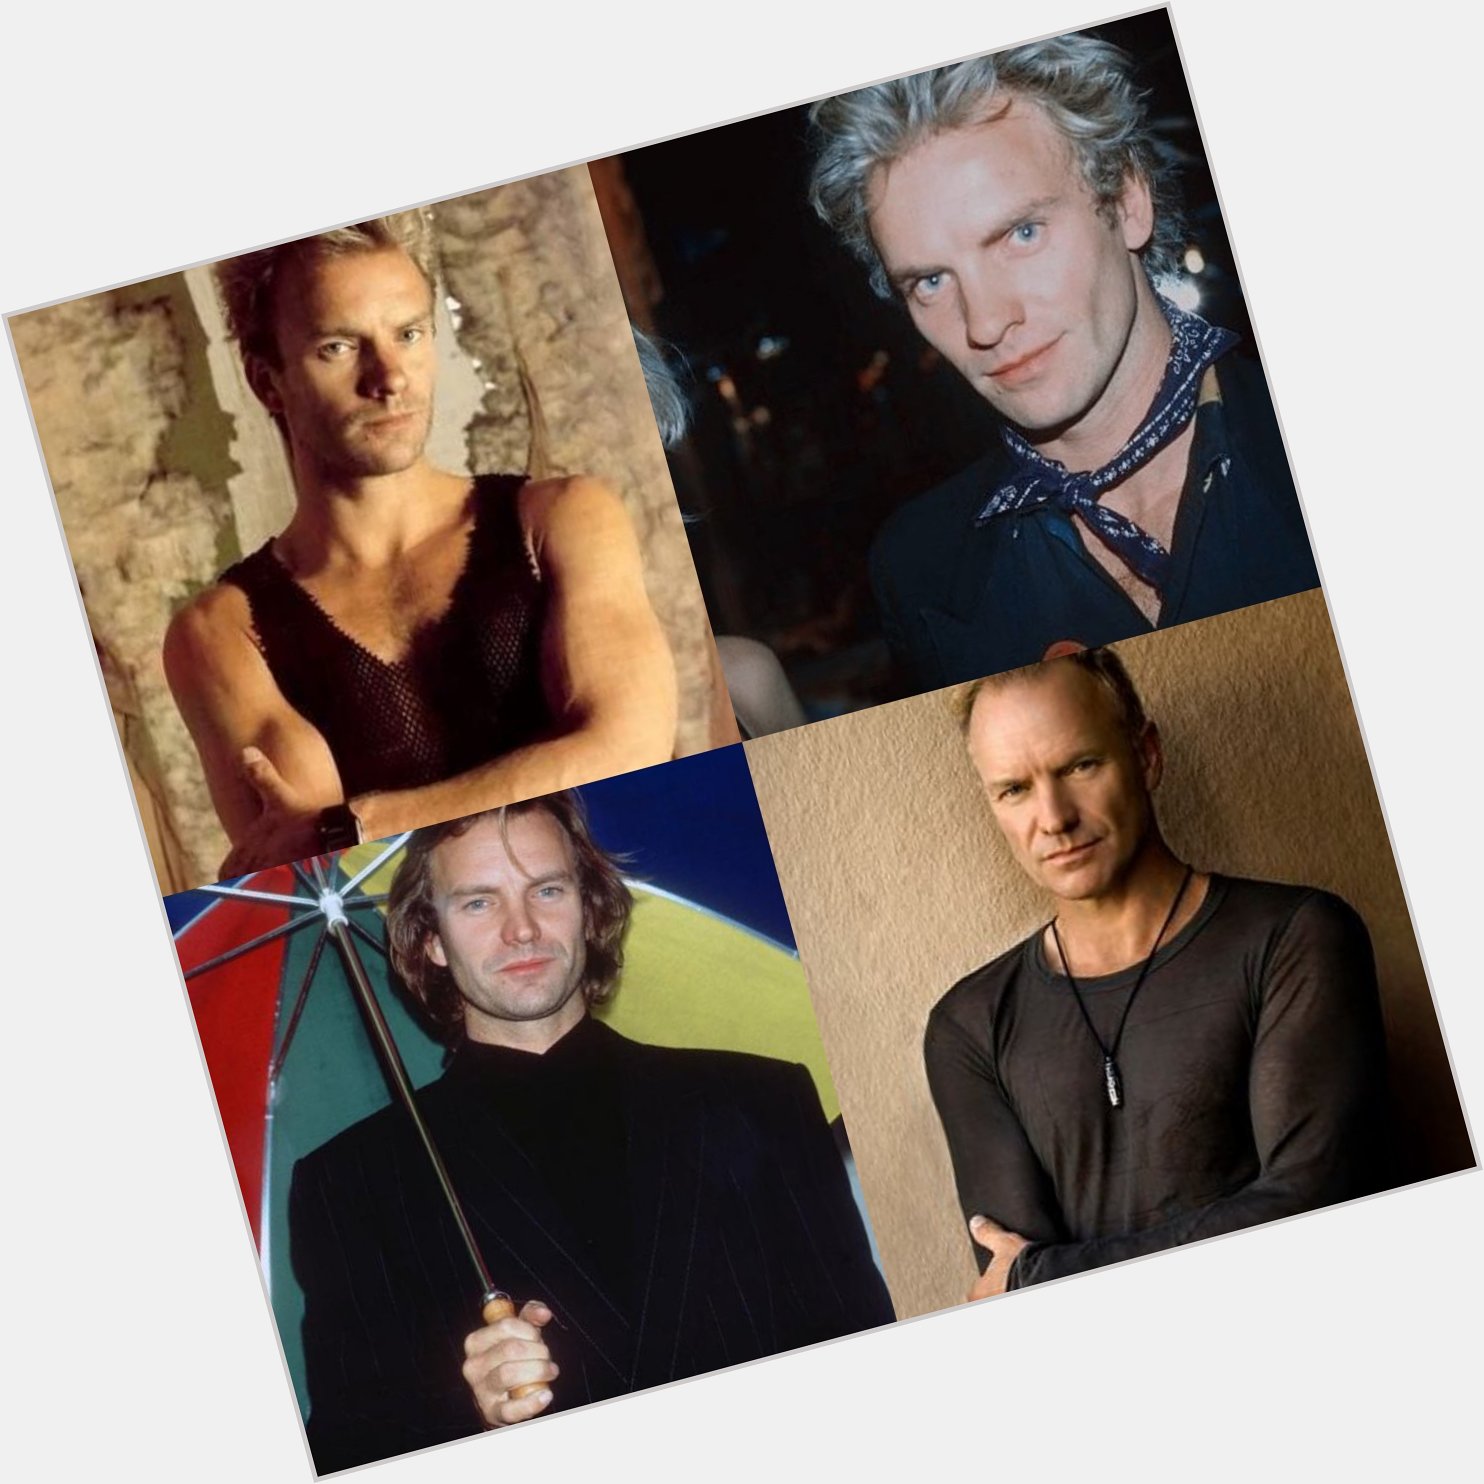 Happy birthday to
Gordon Sumner aka Sting
What are your essential 
Police & solo tracks? 